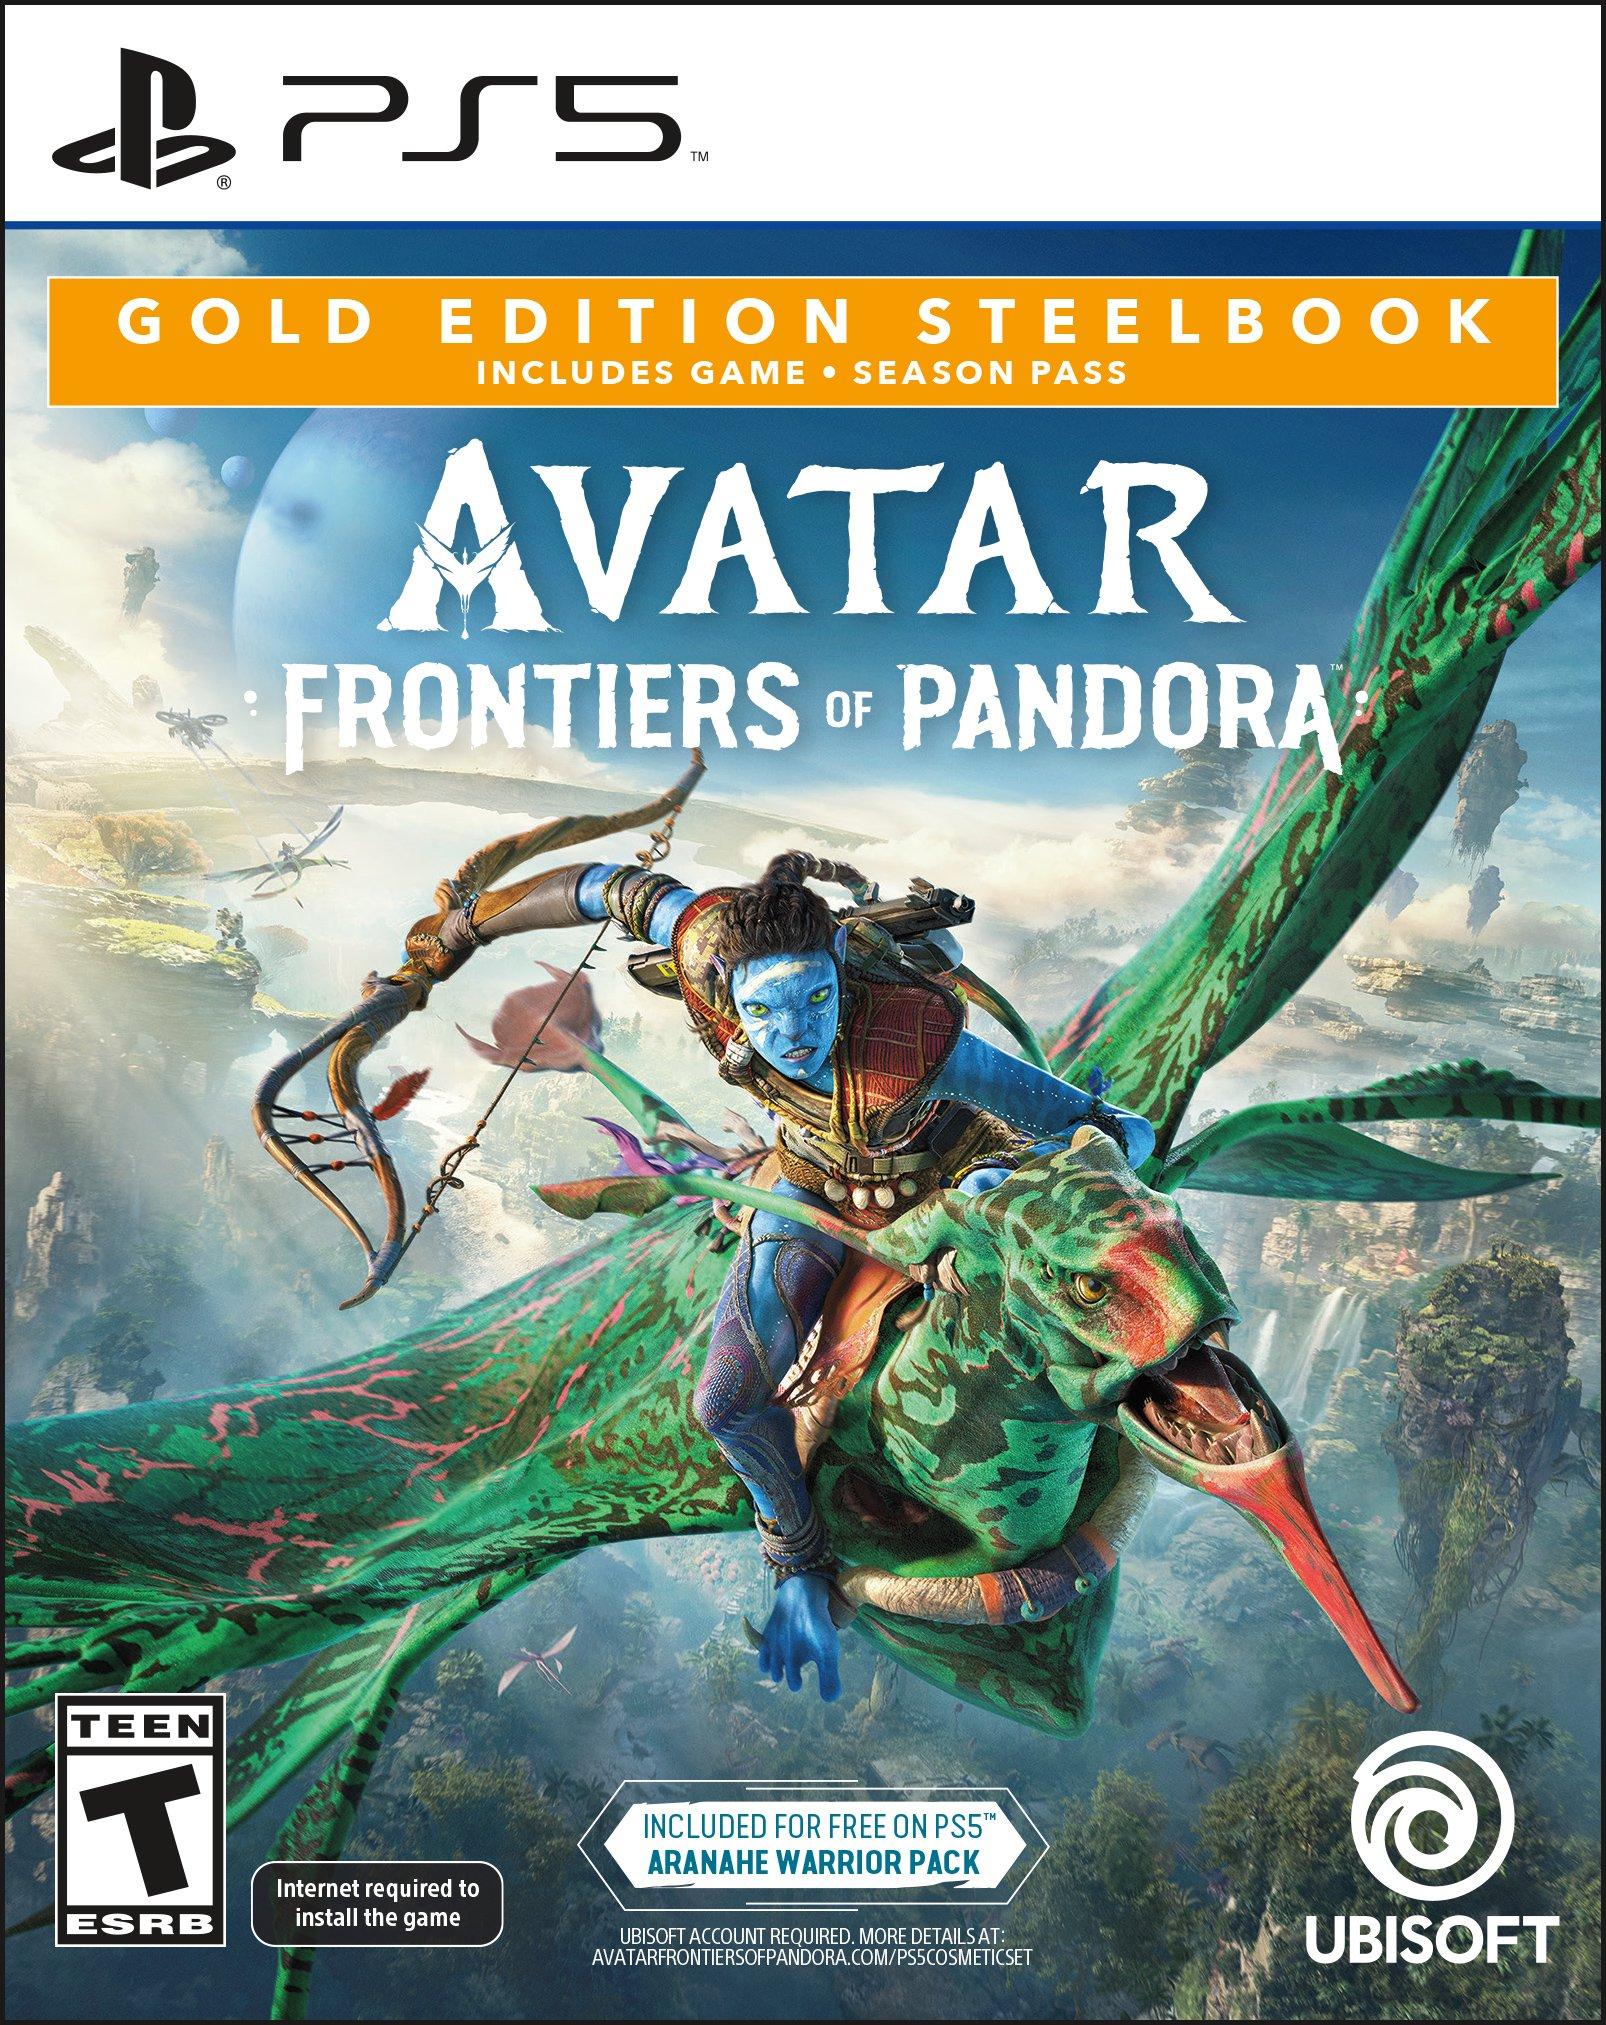 Avatar: Frontiers of Pandora - PS5/XBox Series X / Steelbook or Collectors  editions now available at GameStop : r/Steelbooks